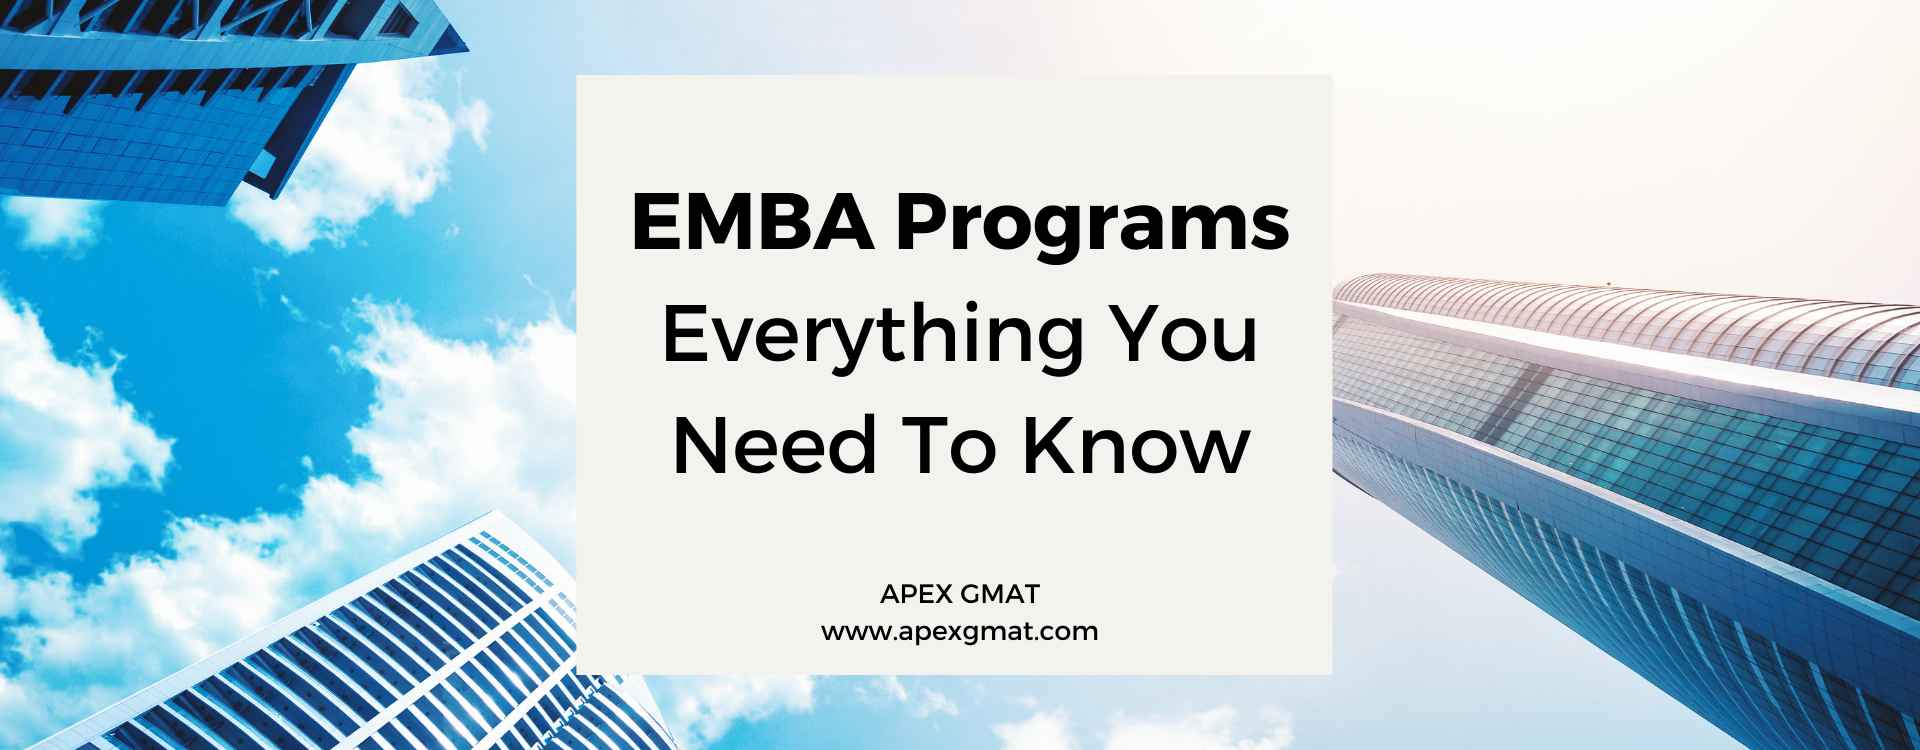 EMBA Programs – Everything You Need To Know